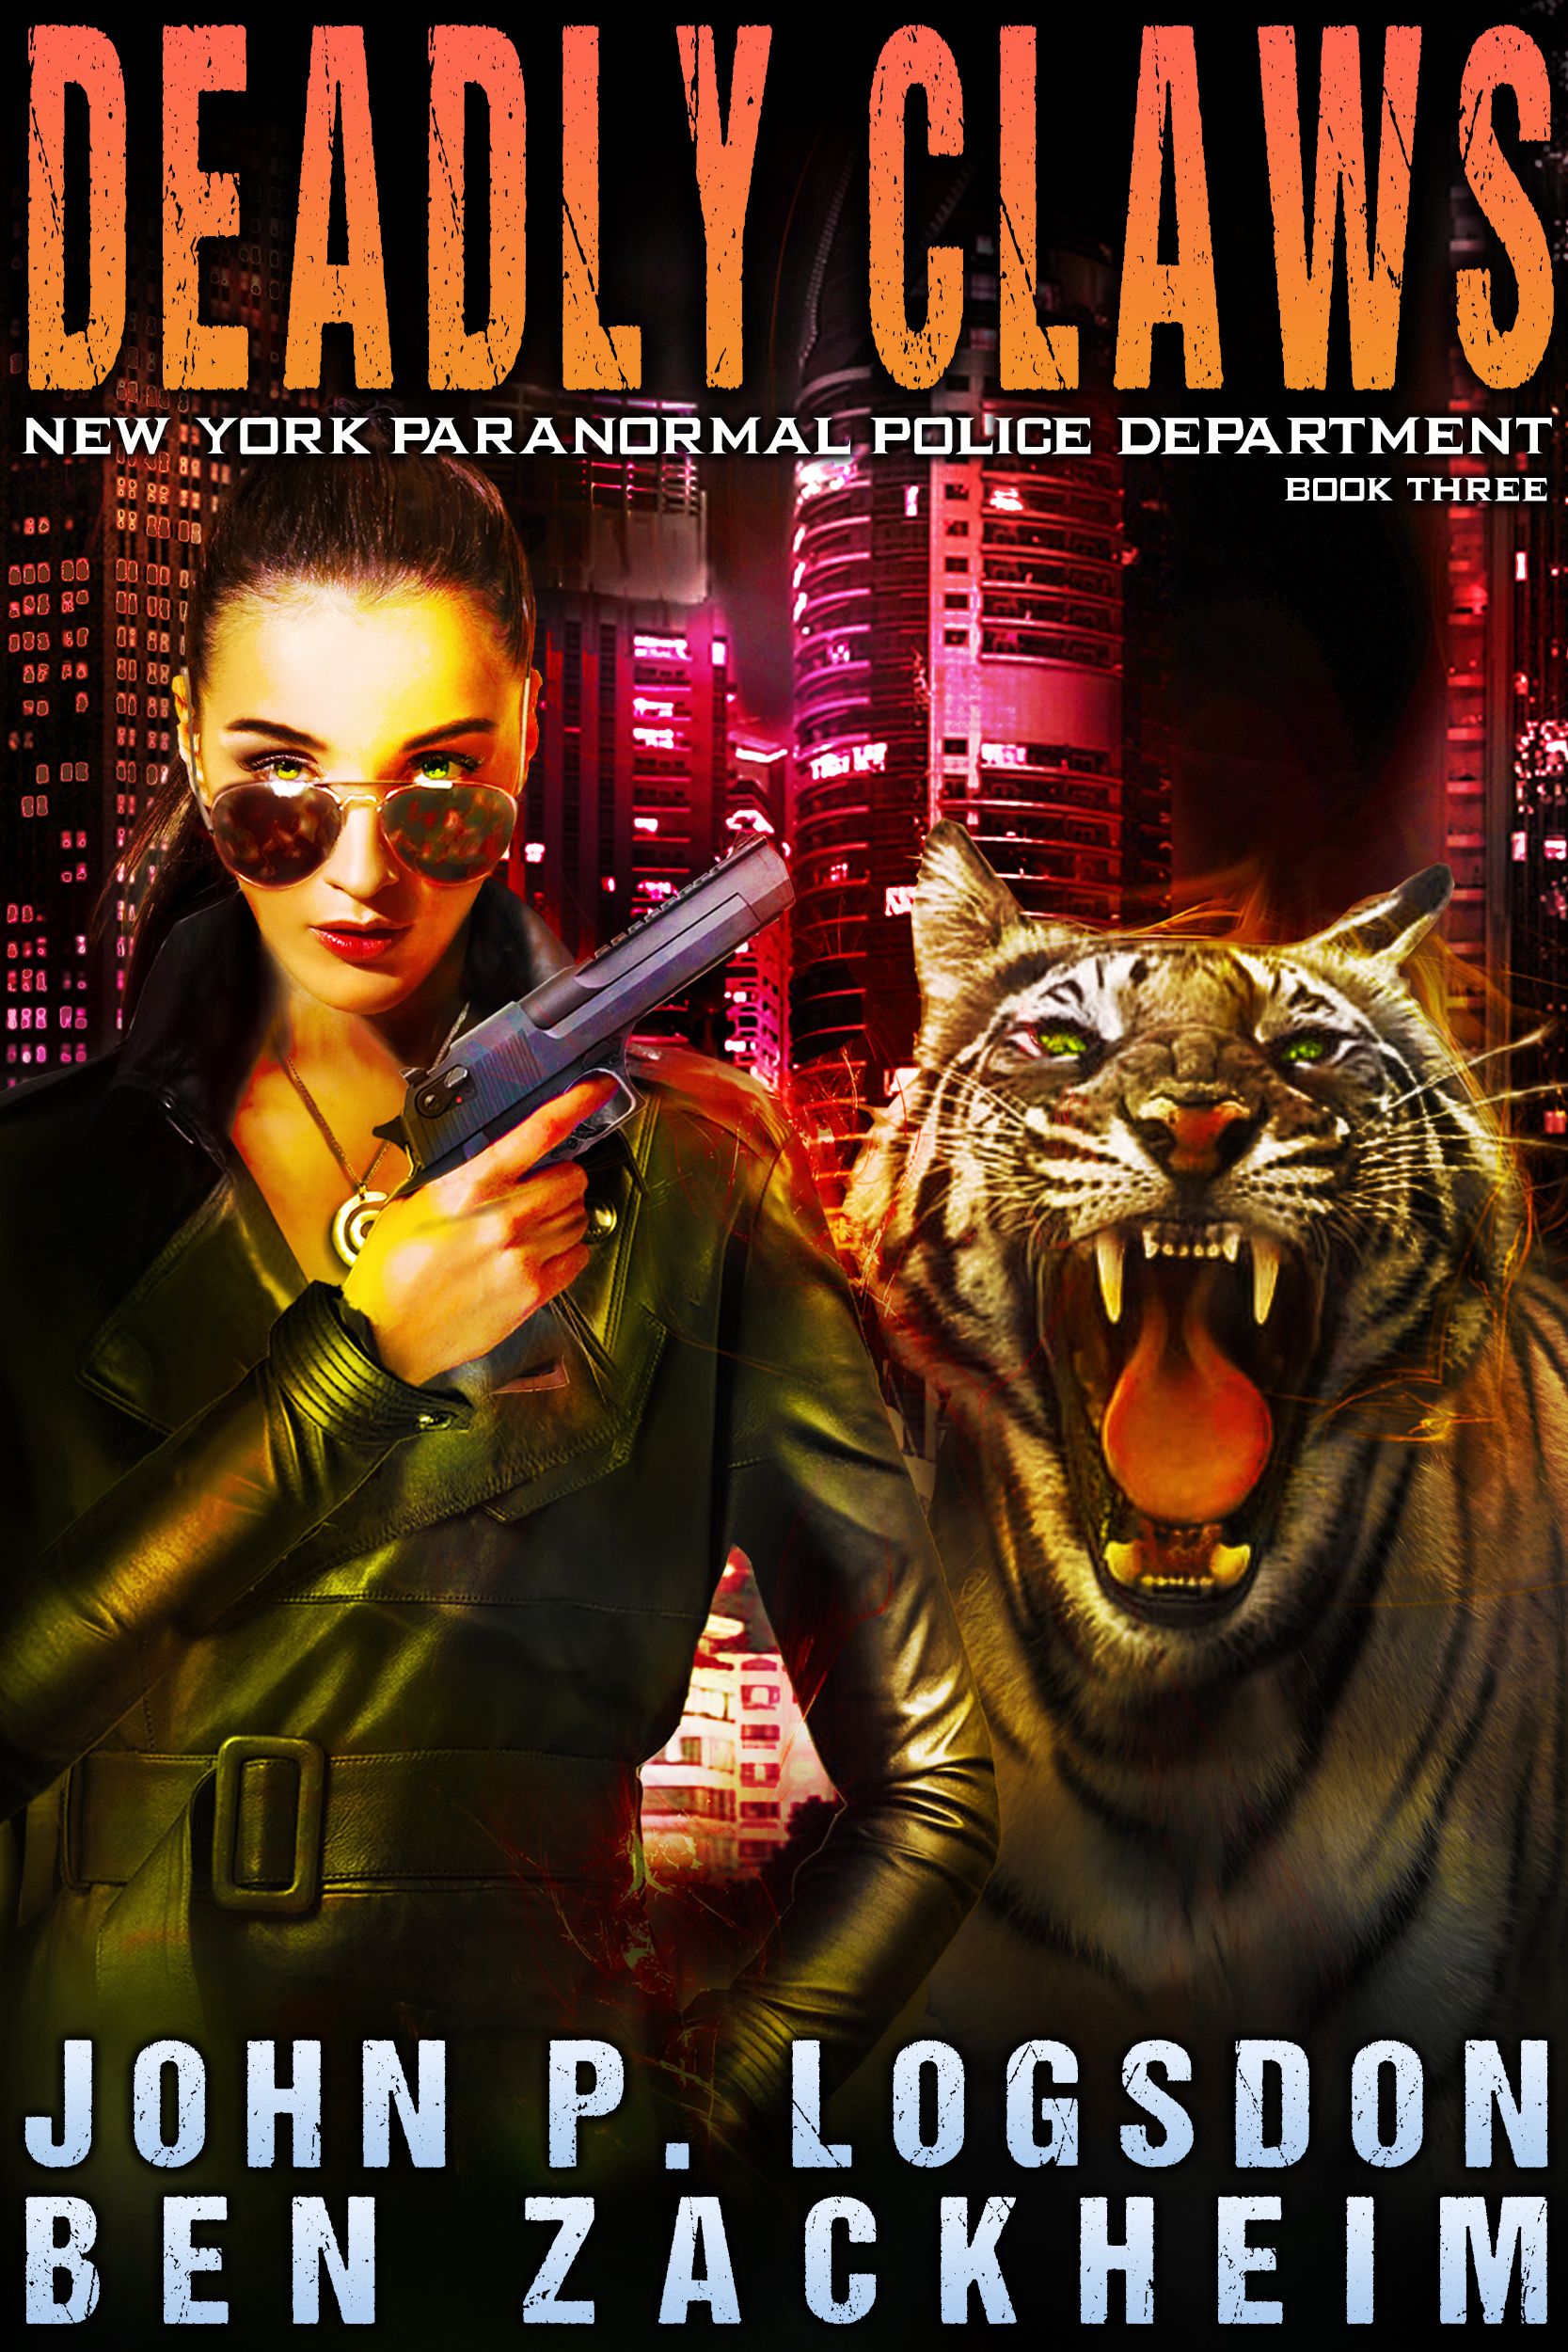 Urban Fantasy Ben Zackheim ebook cover of Bethany Black Supernatural Detective with her altered tiger form.